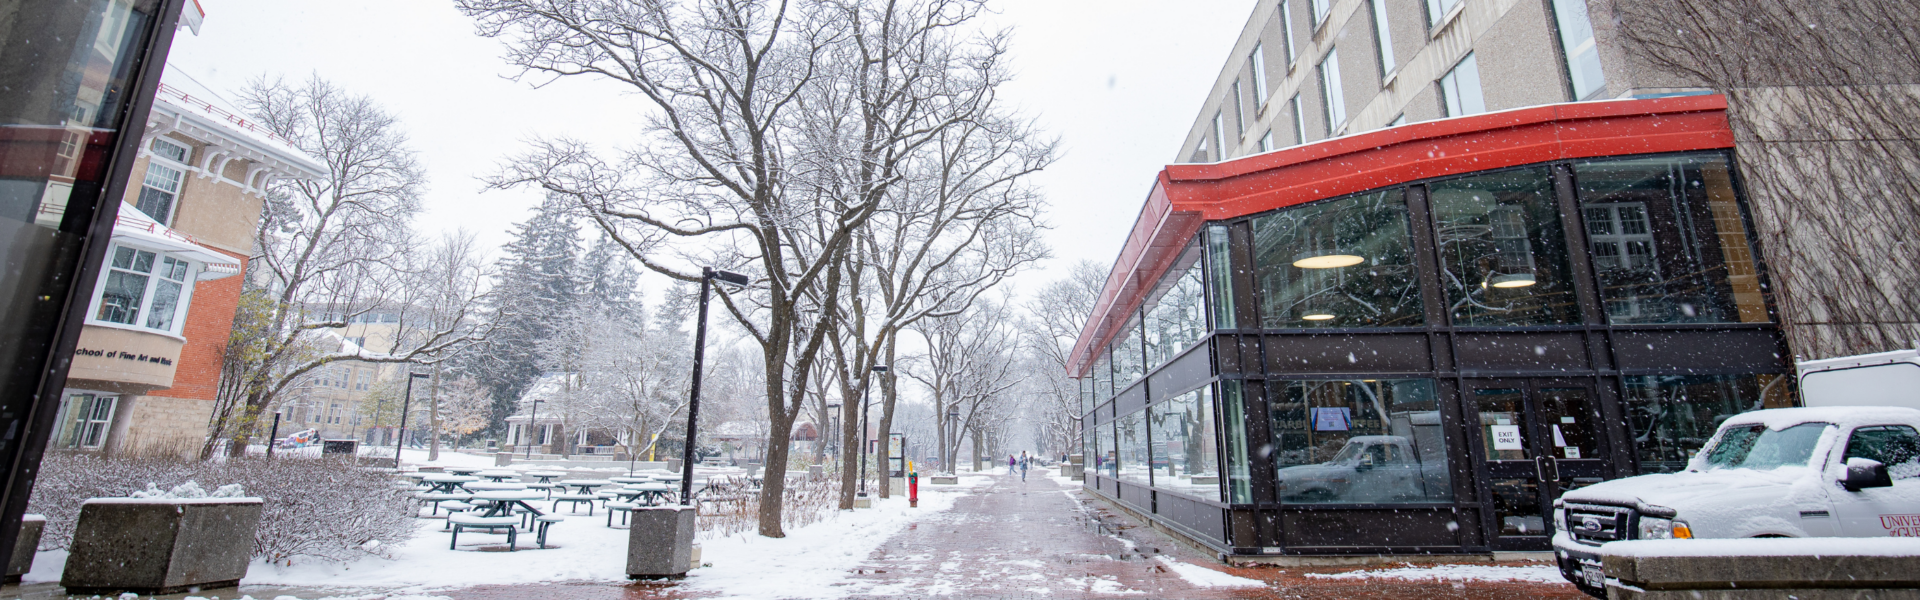 The path in front of the university centre on a snowy day.